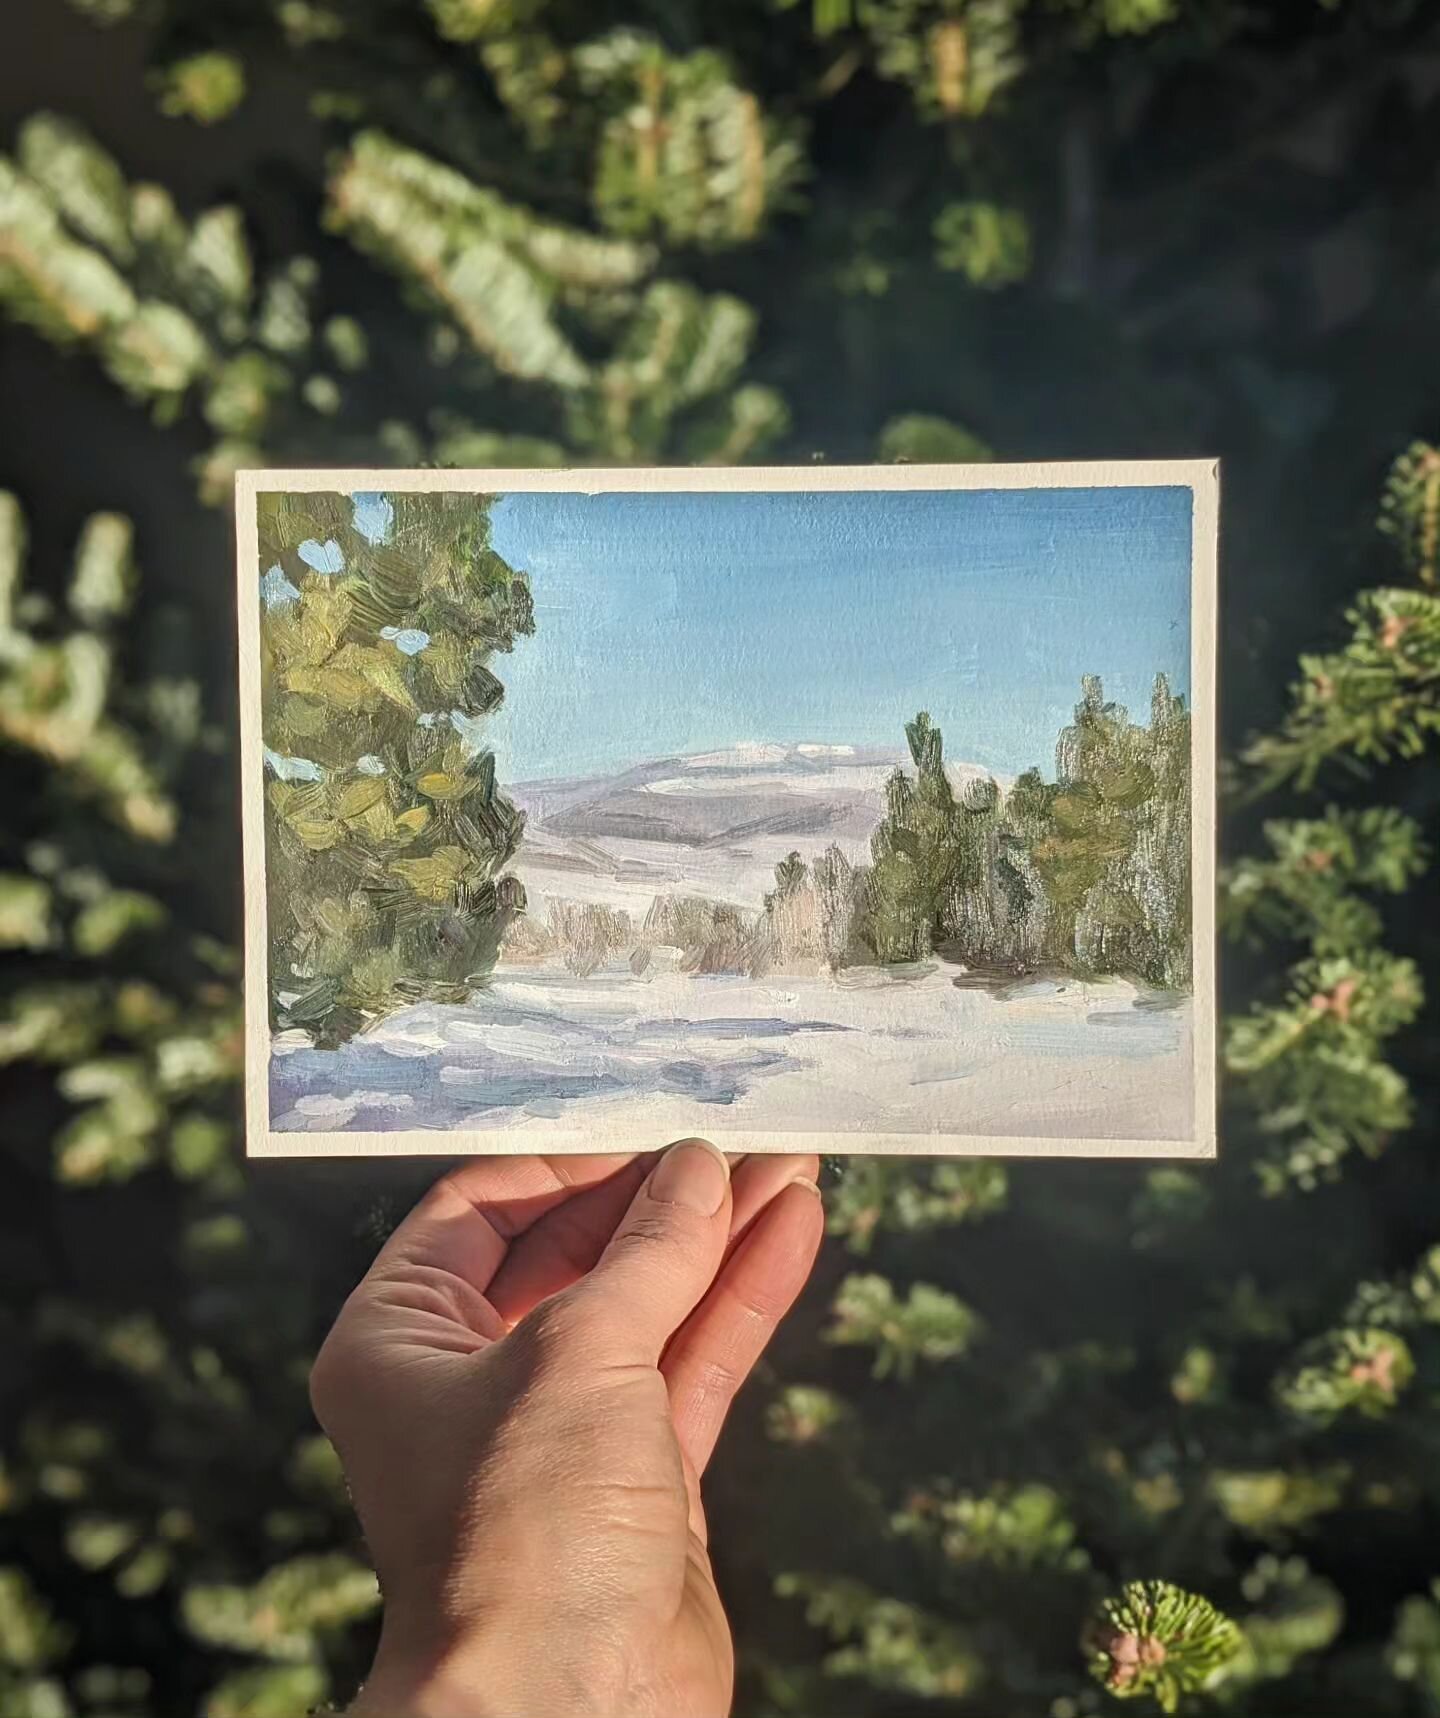 This winter wonderland mini goes out to all the green run skiers! Buttermilk. is. PARADISE. Gently sloping you through lovely scenery right down apr&egrave;s-ski 💚❄️
Psssst: 2 spots left for landscape mini commissions!!! DM if interested! 

#artofin